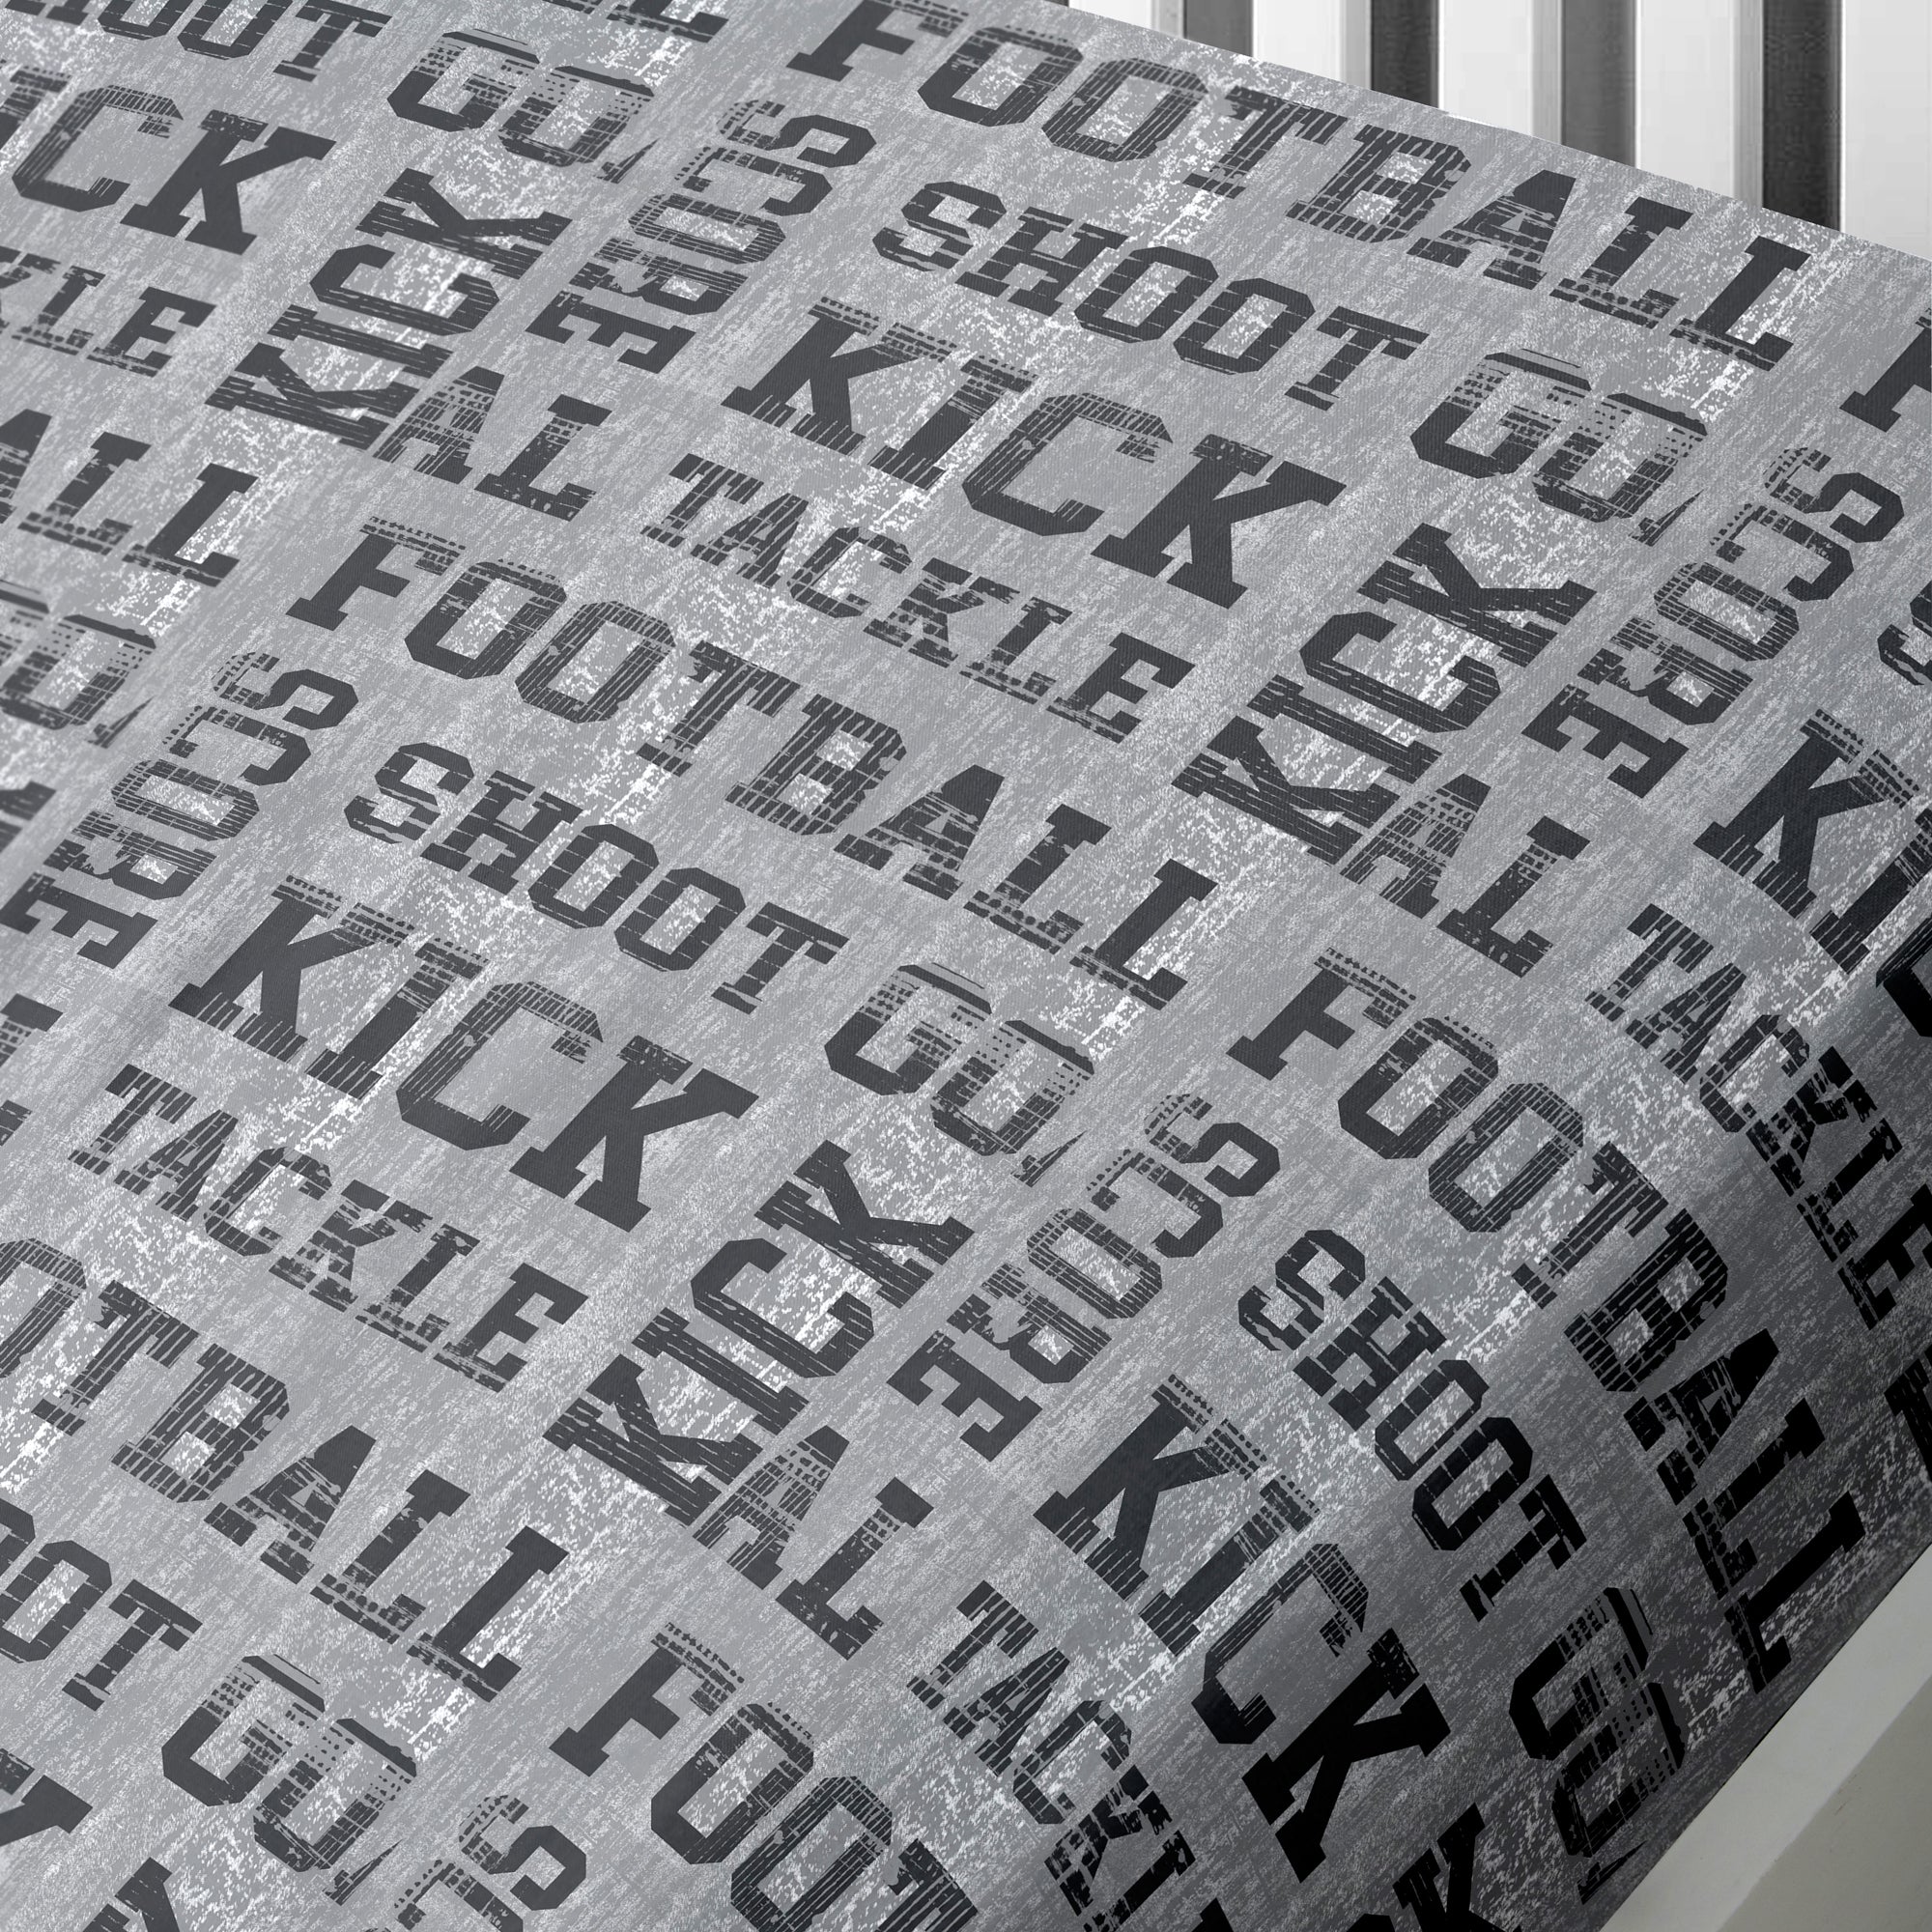 Football - Easy Care Duvet Cover Set in Blue - by Bedlam